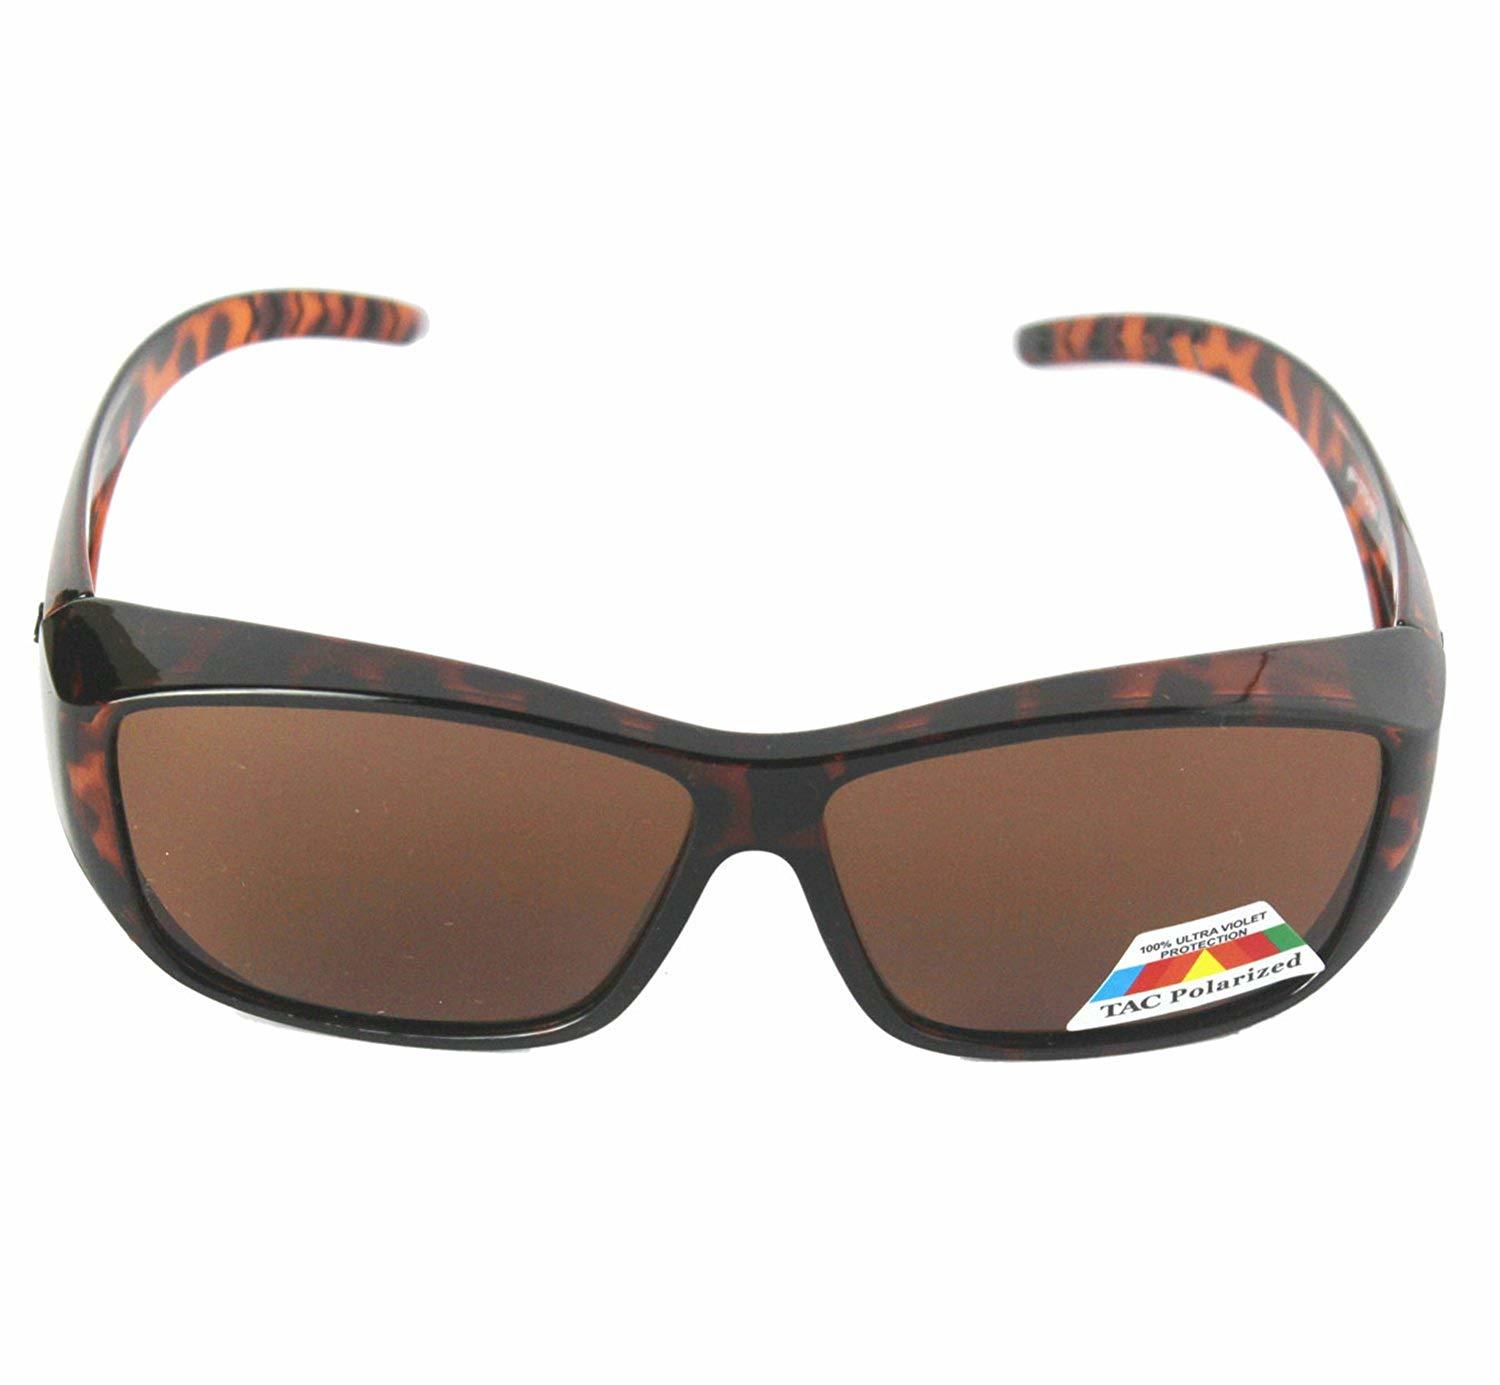 Fit Over Polarized Sunglasses to Wear Over Regular Glasses for Men and ...